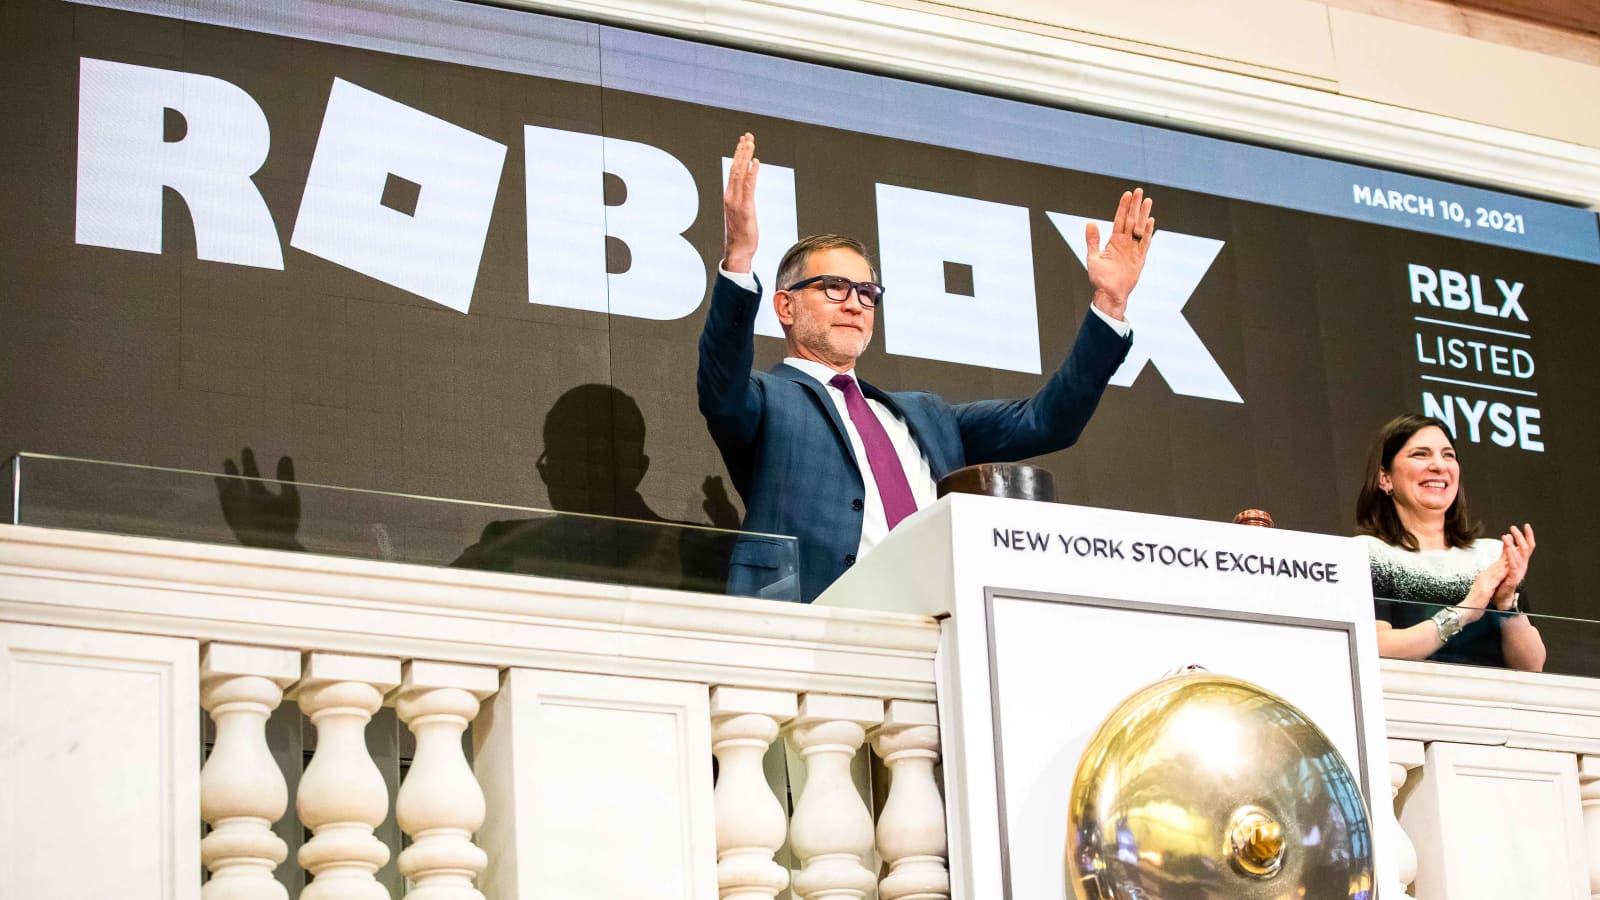 Roblox Stock: Buying A Piece Of The Metaverse (NYSE:RBLX